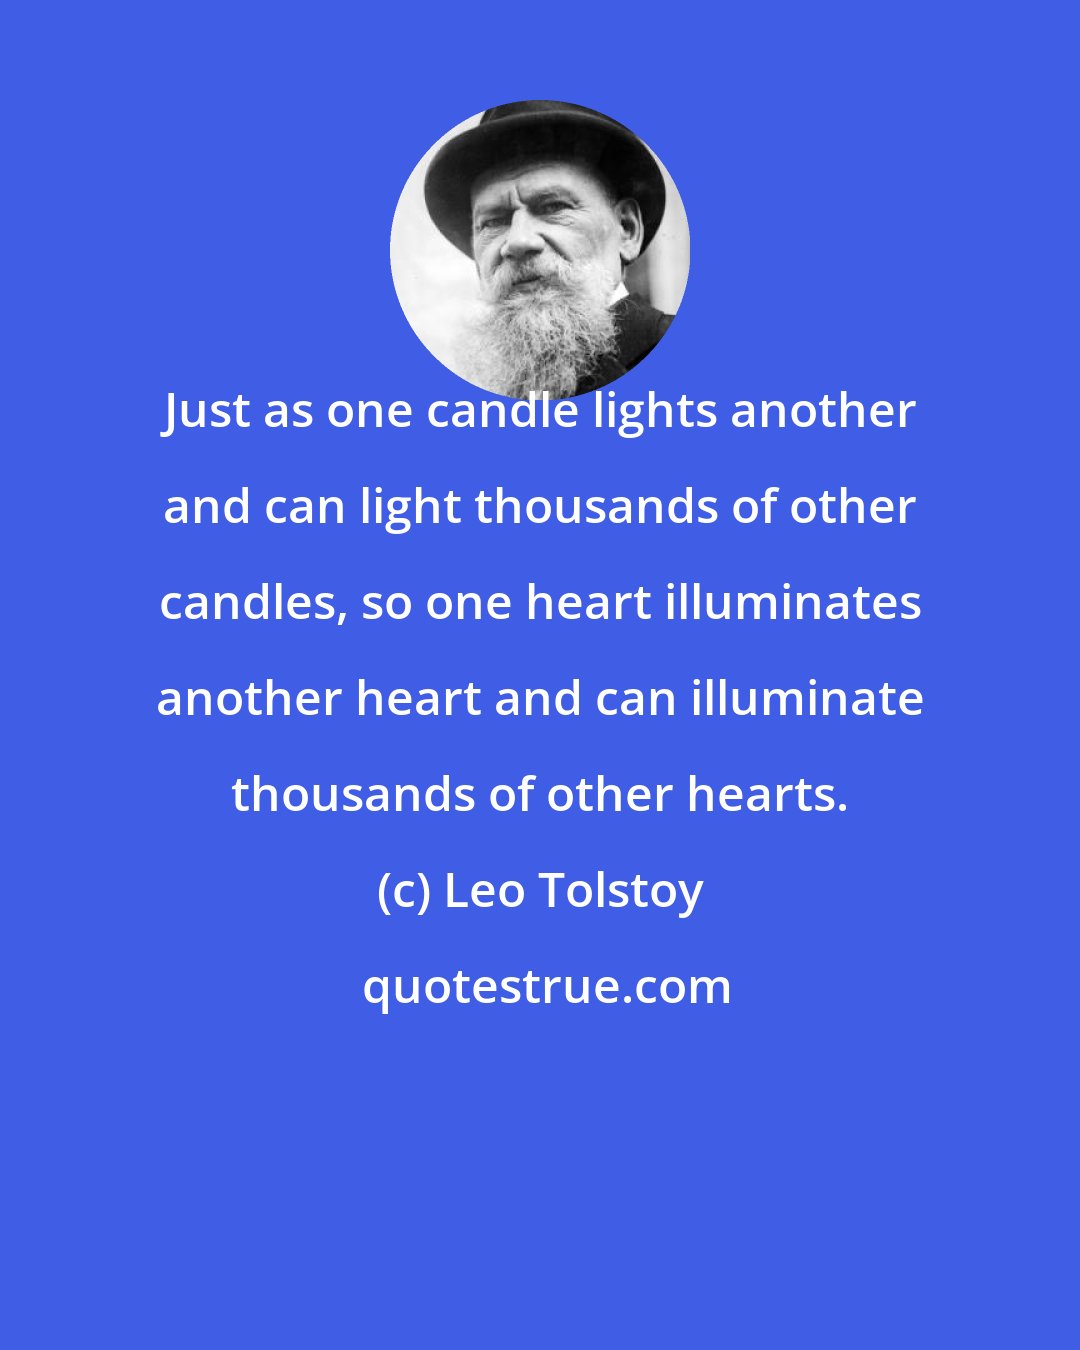 Leo Tolstoy: Just as one candle lights another and can light thousands of other candles, so one heart illuminates another heart and can illuminate thousands of other hearts.